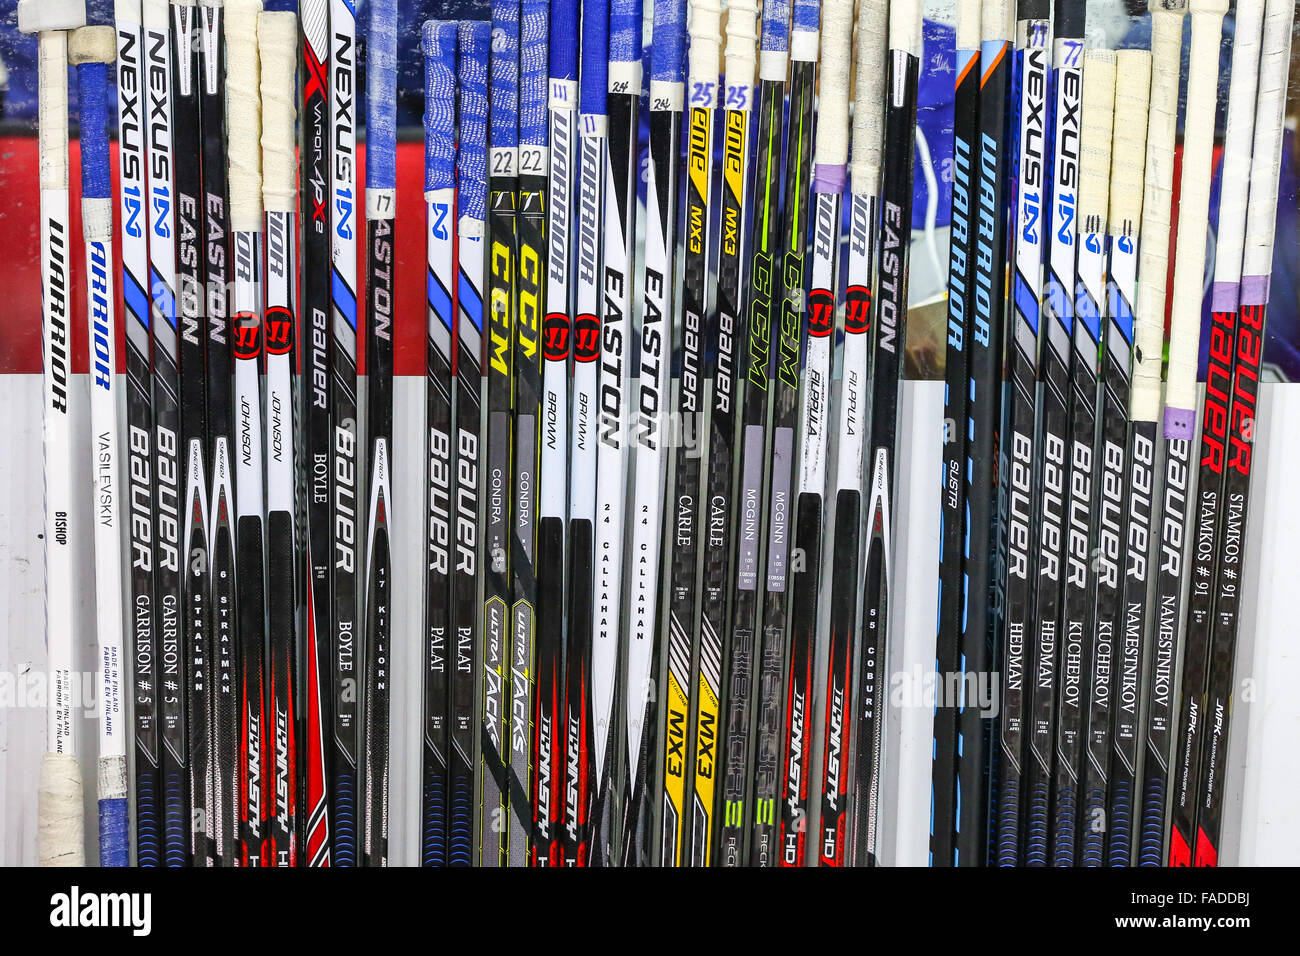 Tampa Bay Lightning hockey sticks during the NHL game between the Tampa Bay Lightning and the Carolina Hurricanes at the PNC Arena. Stock Photo